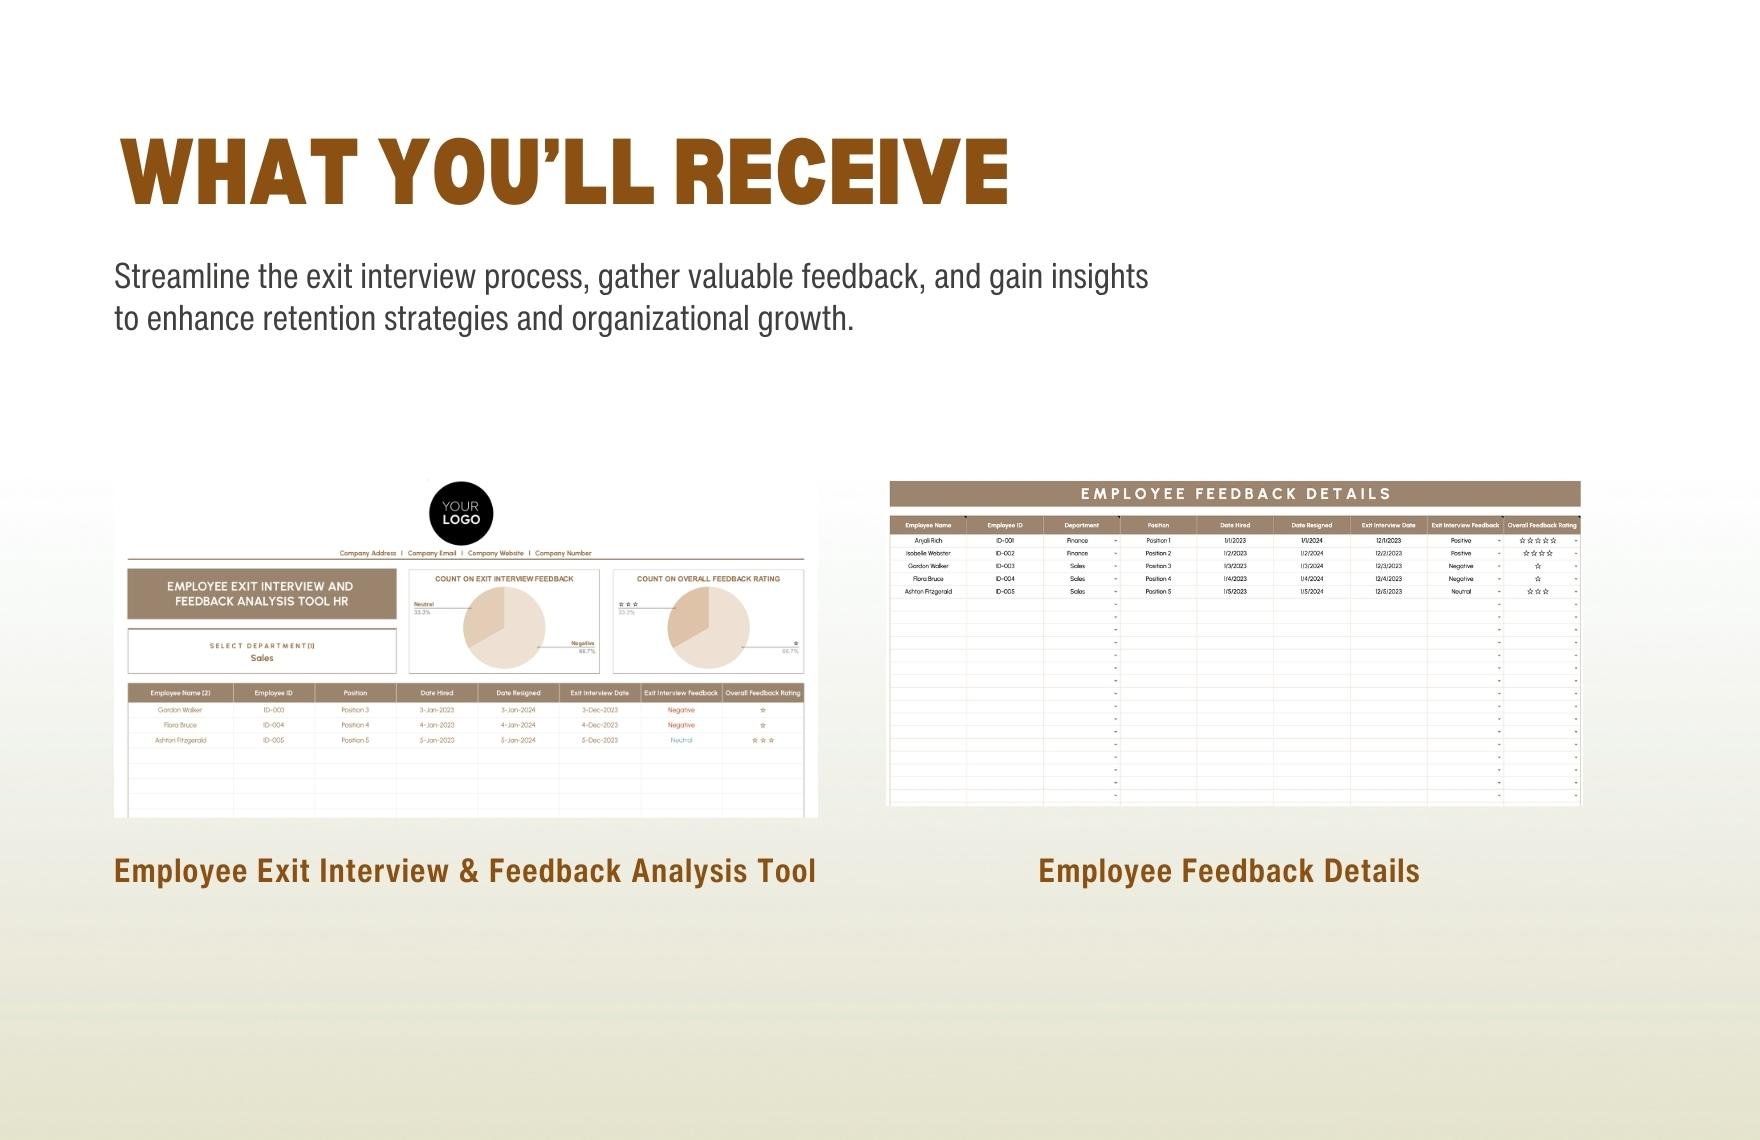 Employee Exit Interview and Feedback Analysis Tool HR Template